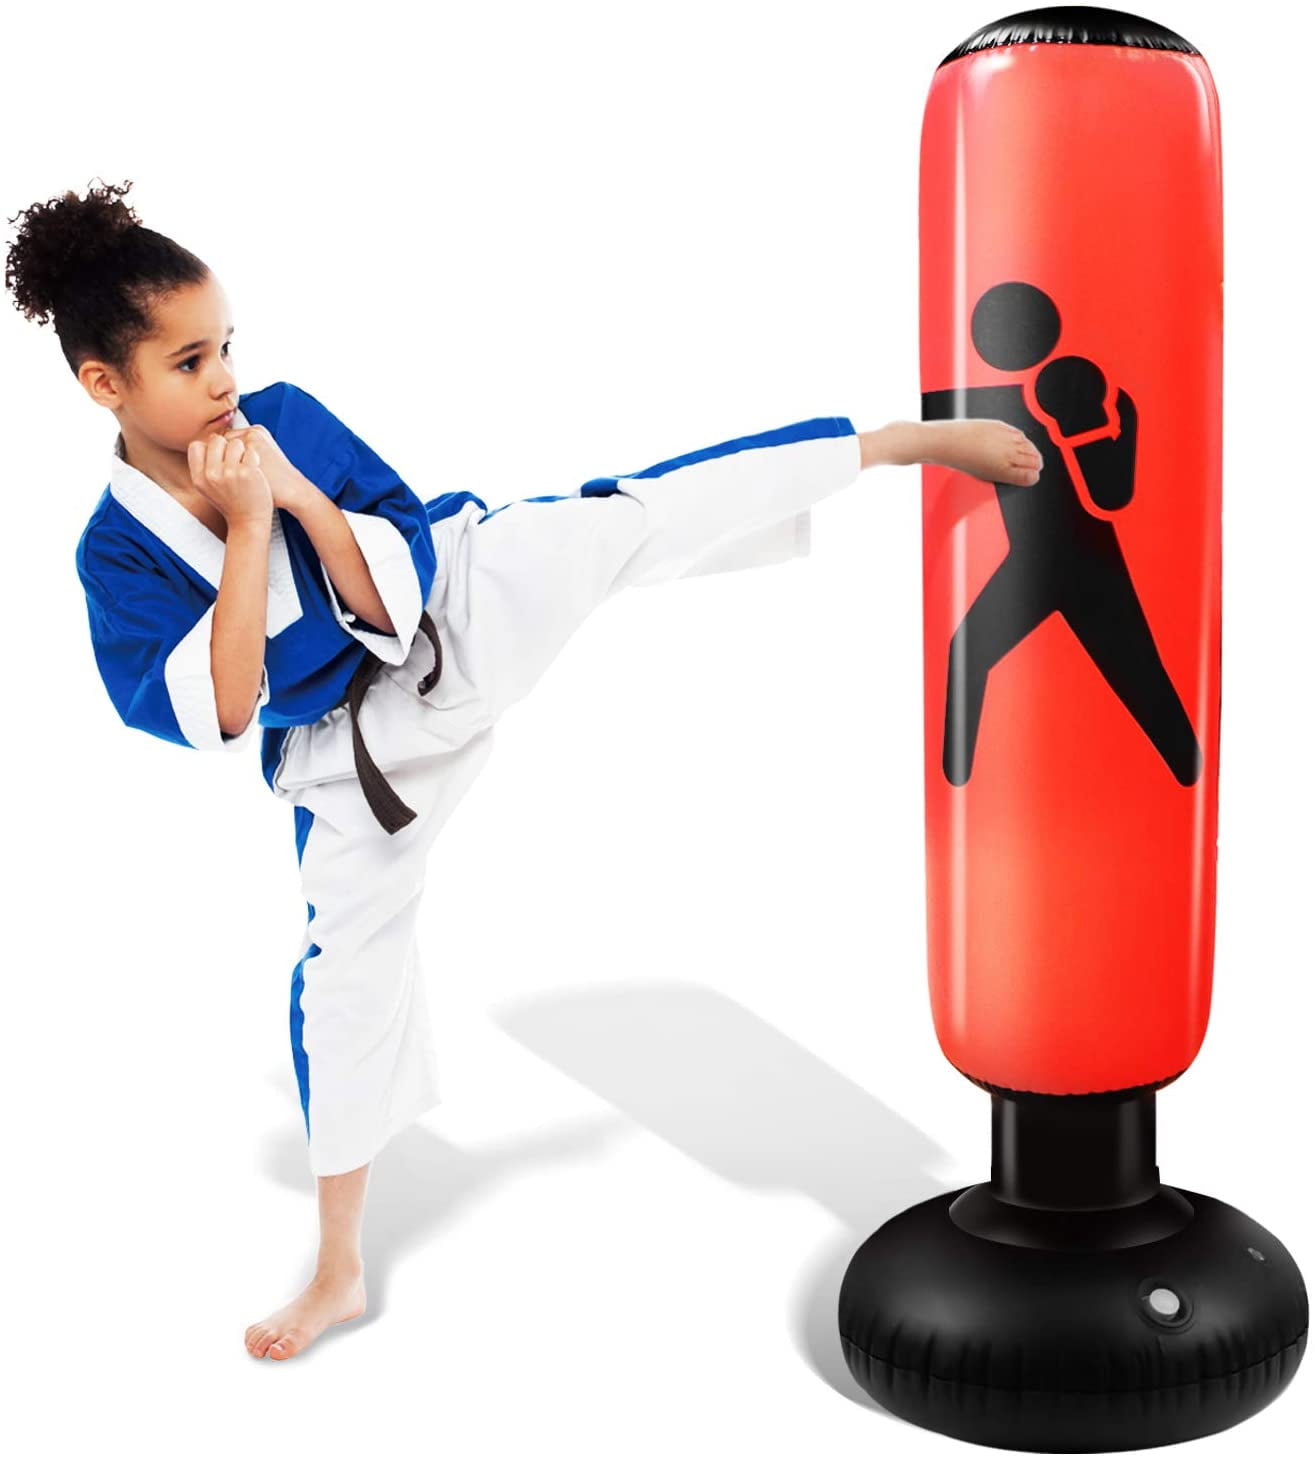 Dog Inflatable Punching Bag TOY 3D Bop bag Blow Up Kids Fun BEST GIFT FOR KIDS 